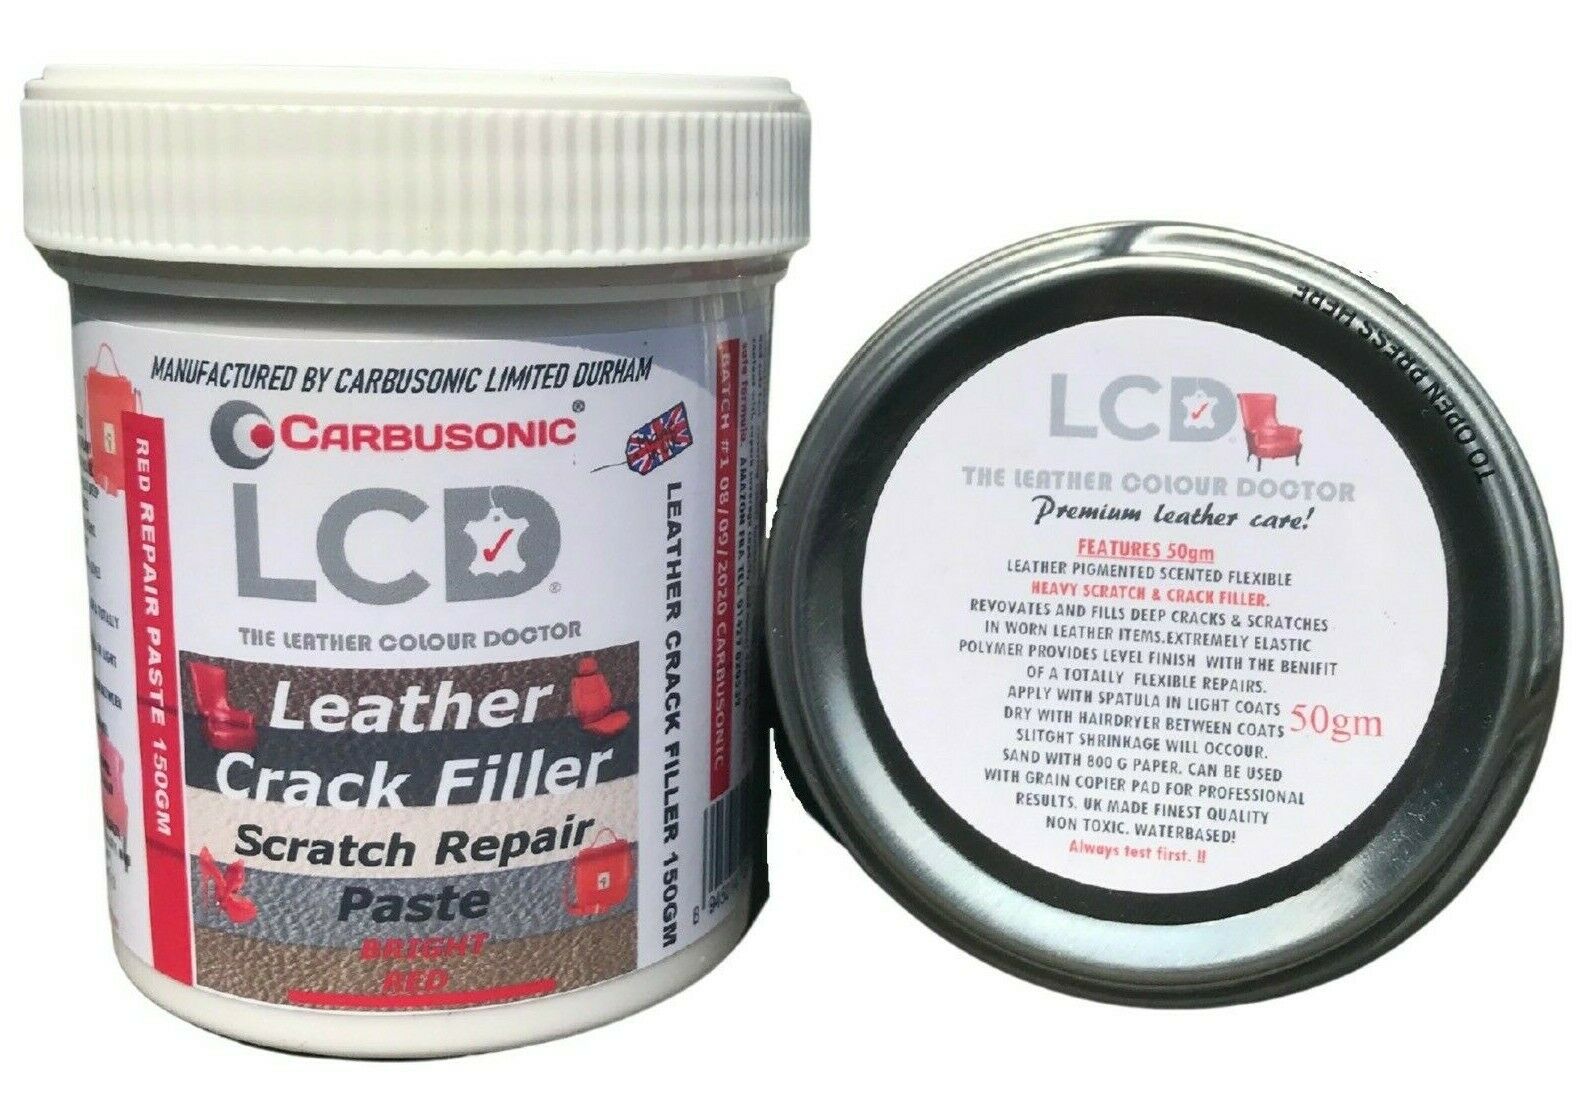 Scratch Doctor Leather Filler - Leather Repair Filler - For